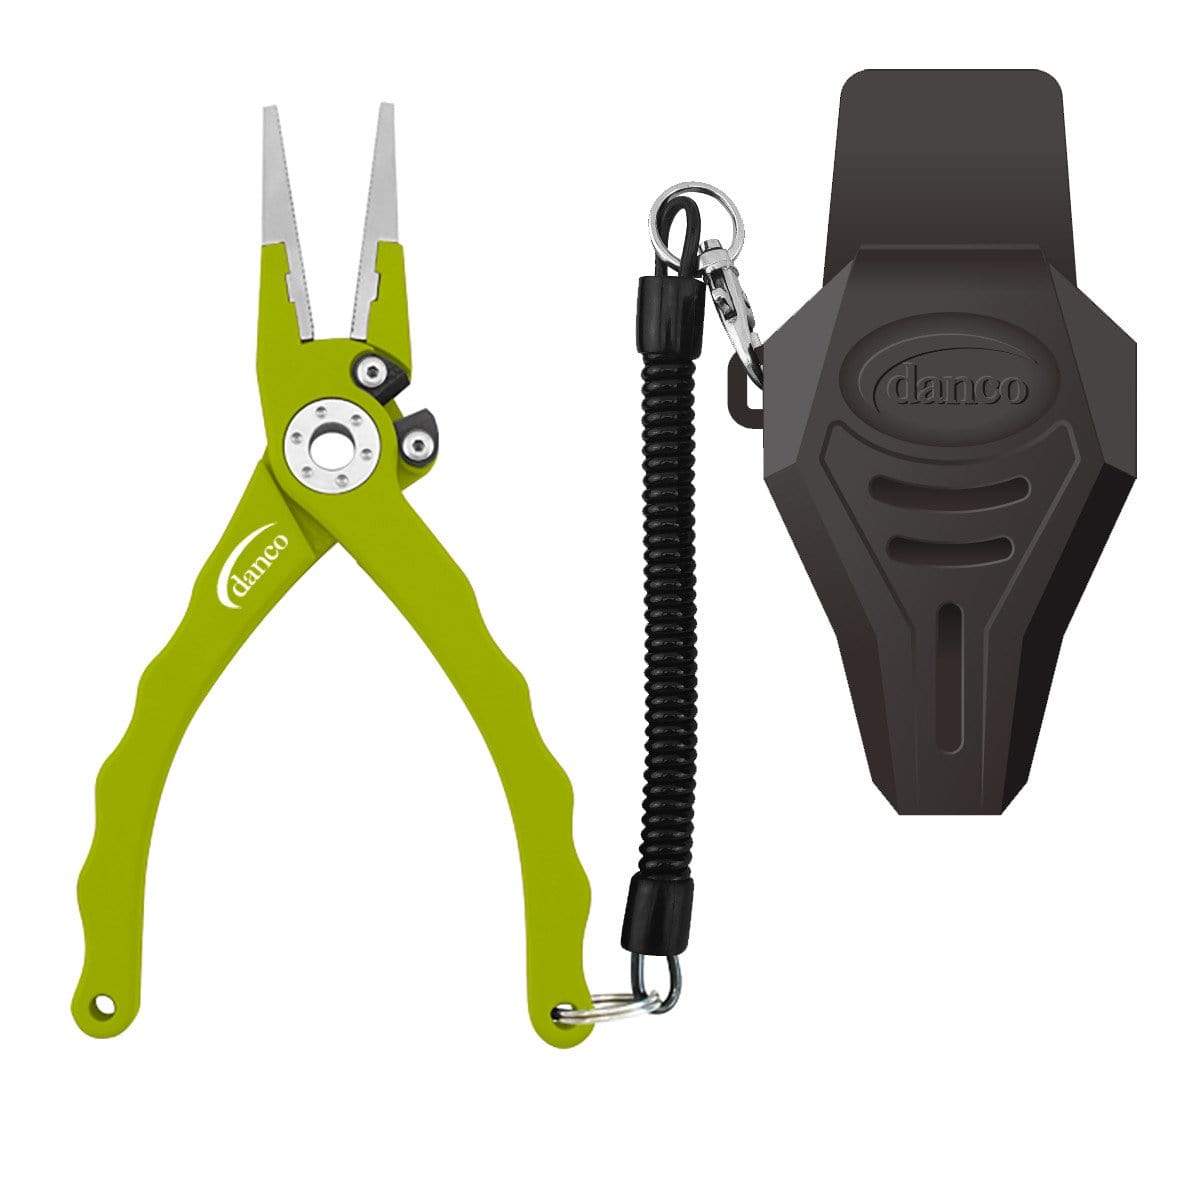 Rubber Bumpers on your Running Pliers